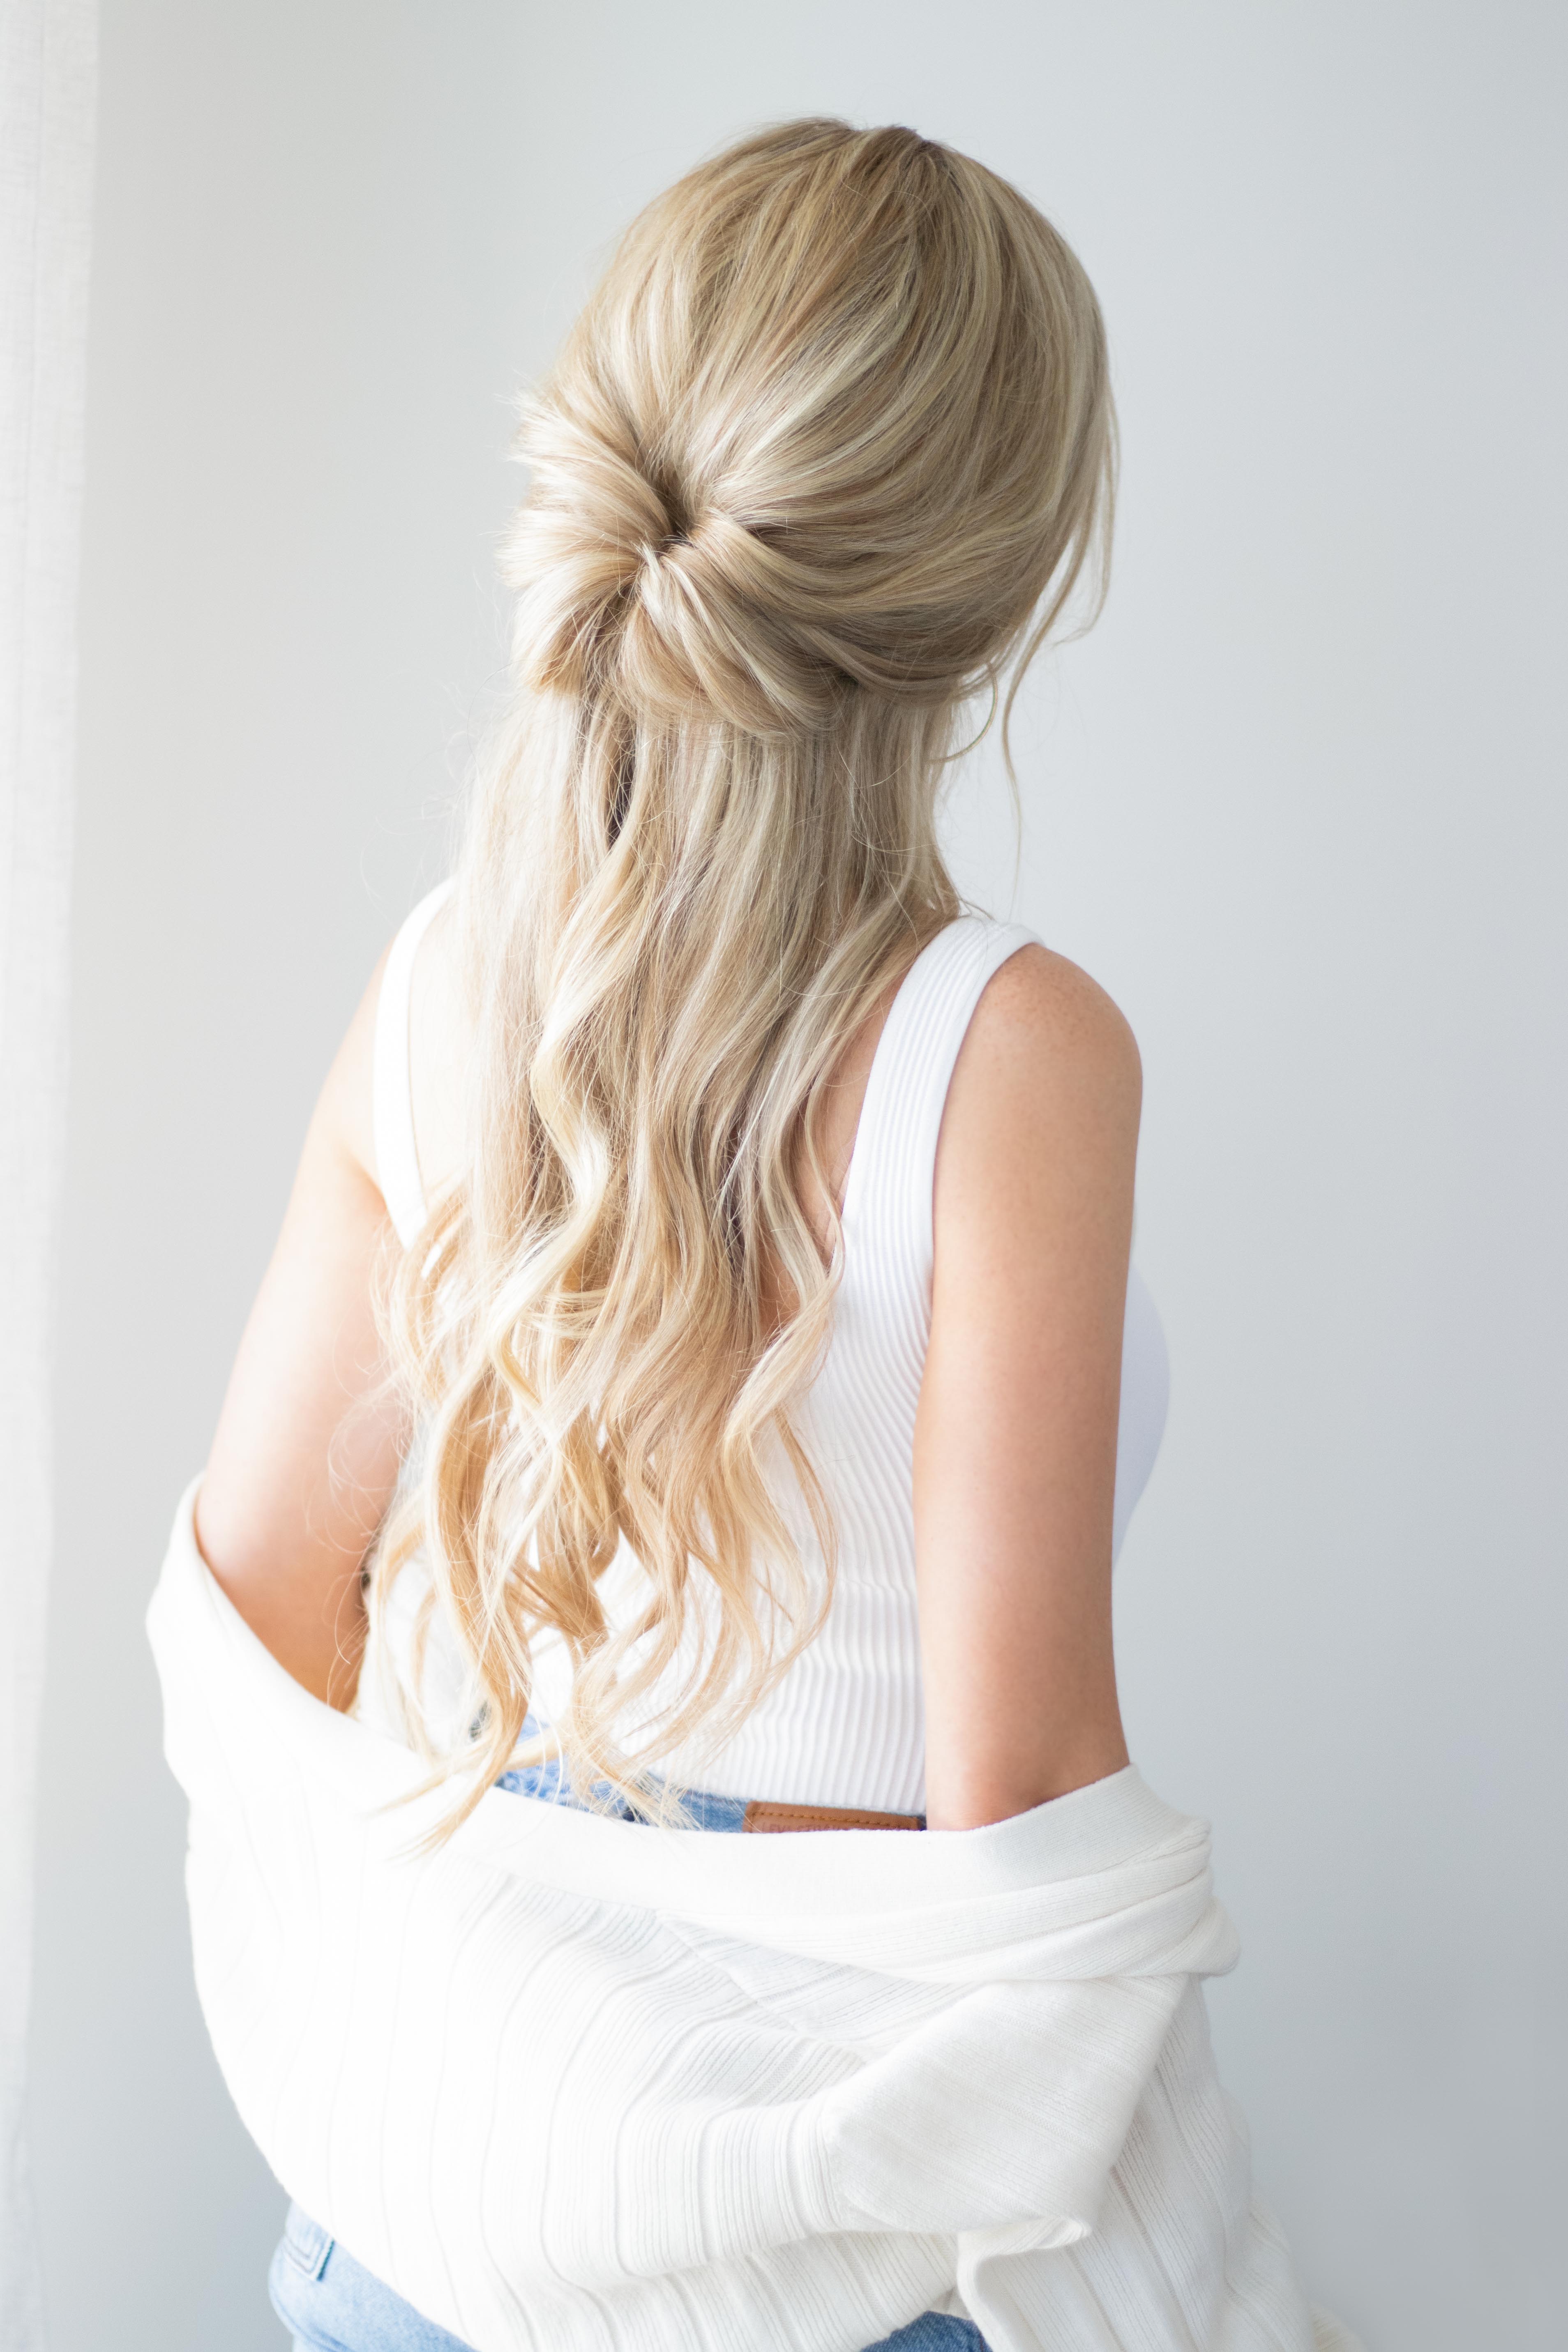 5 Easy Hairstyles for Long Hair to School